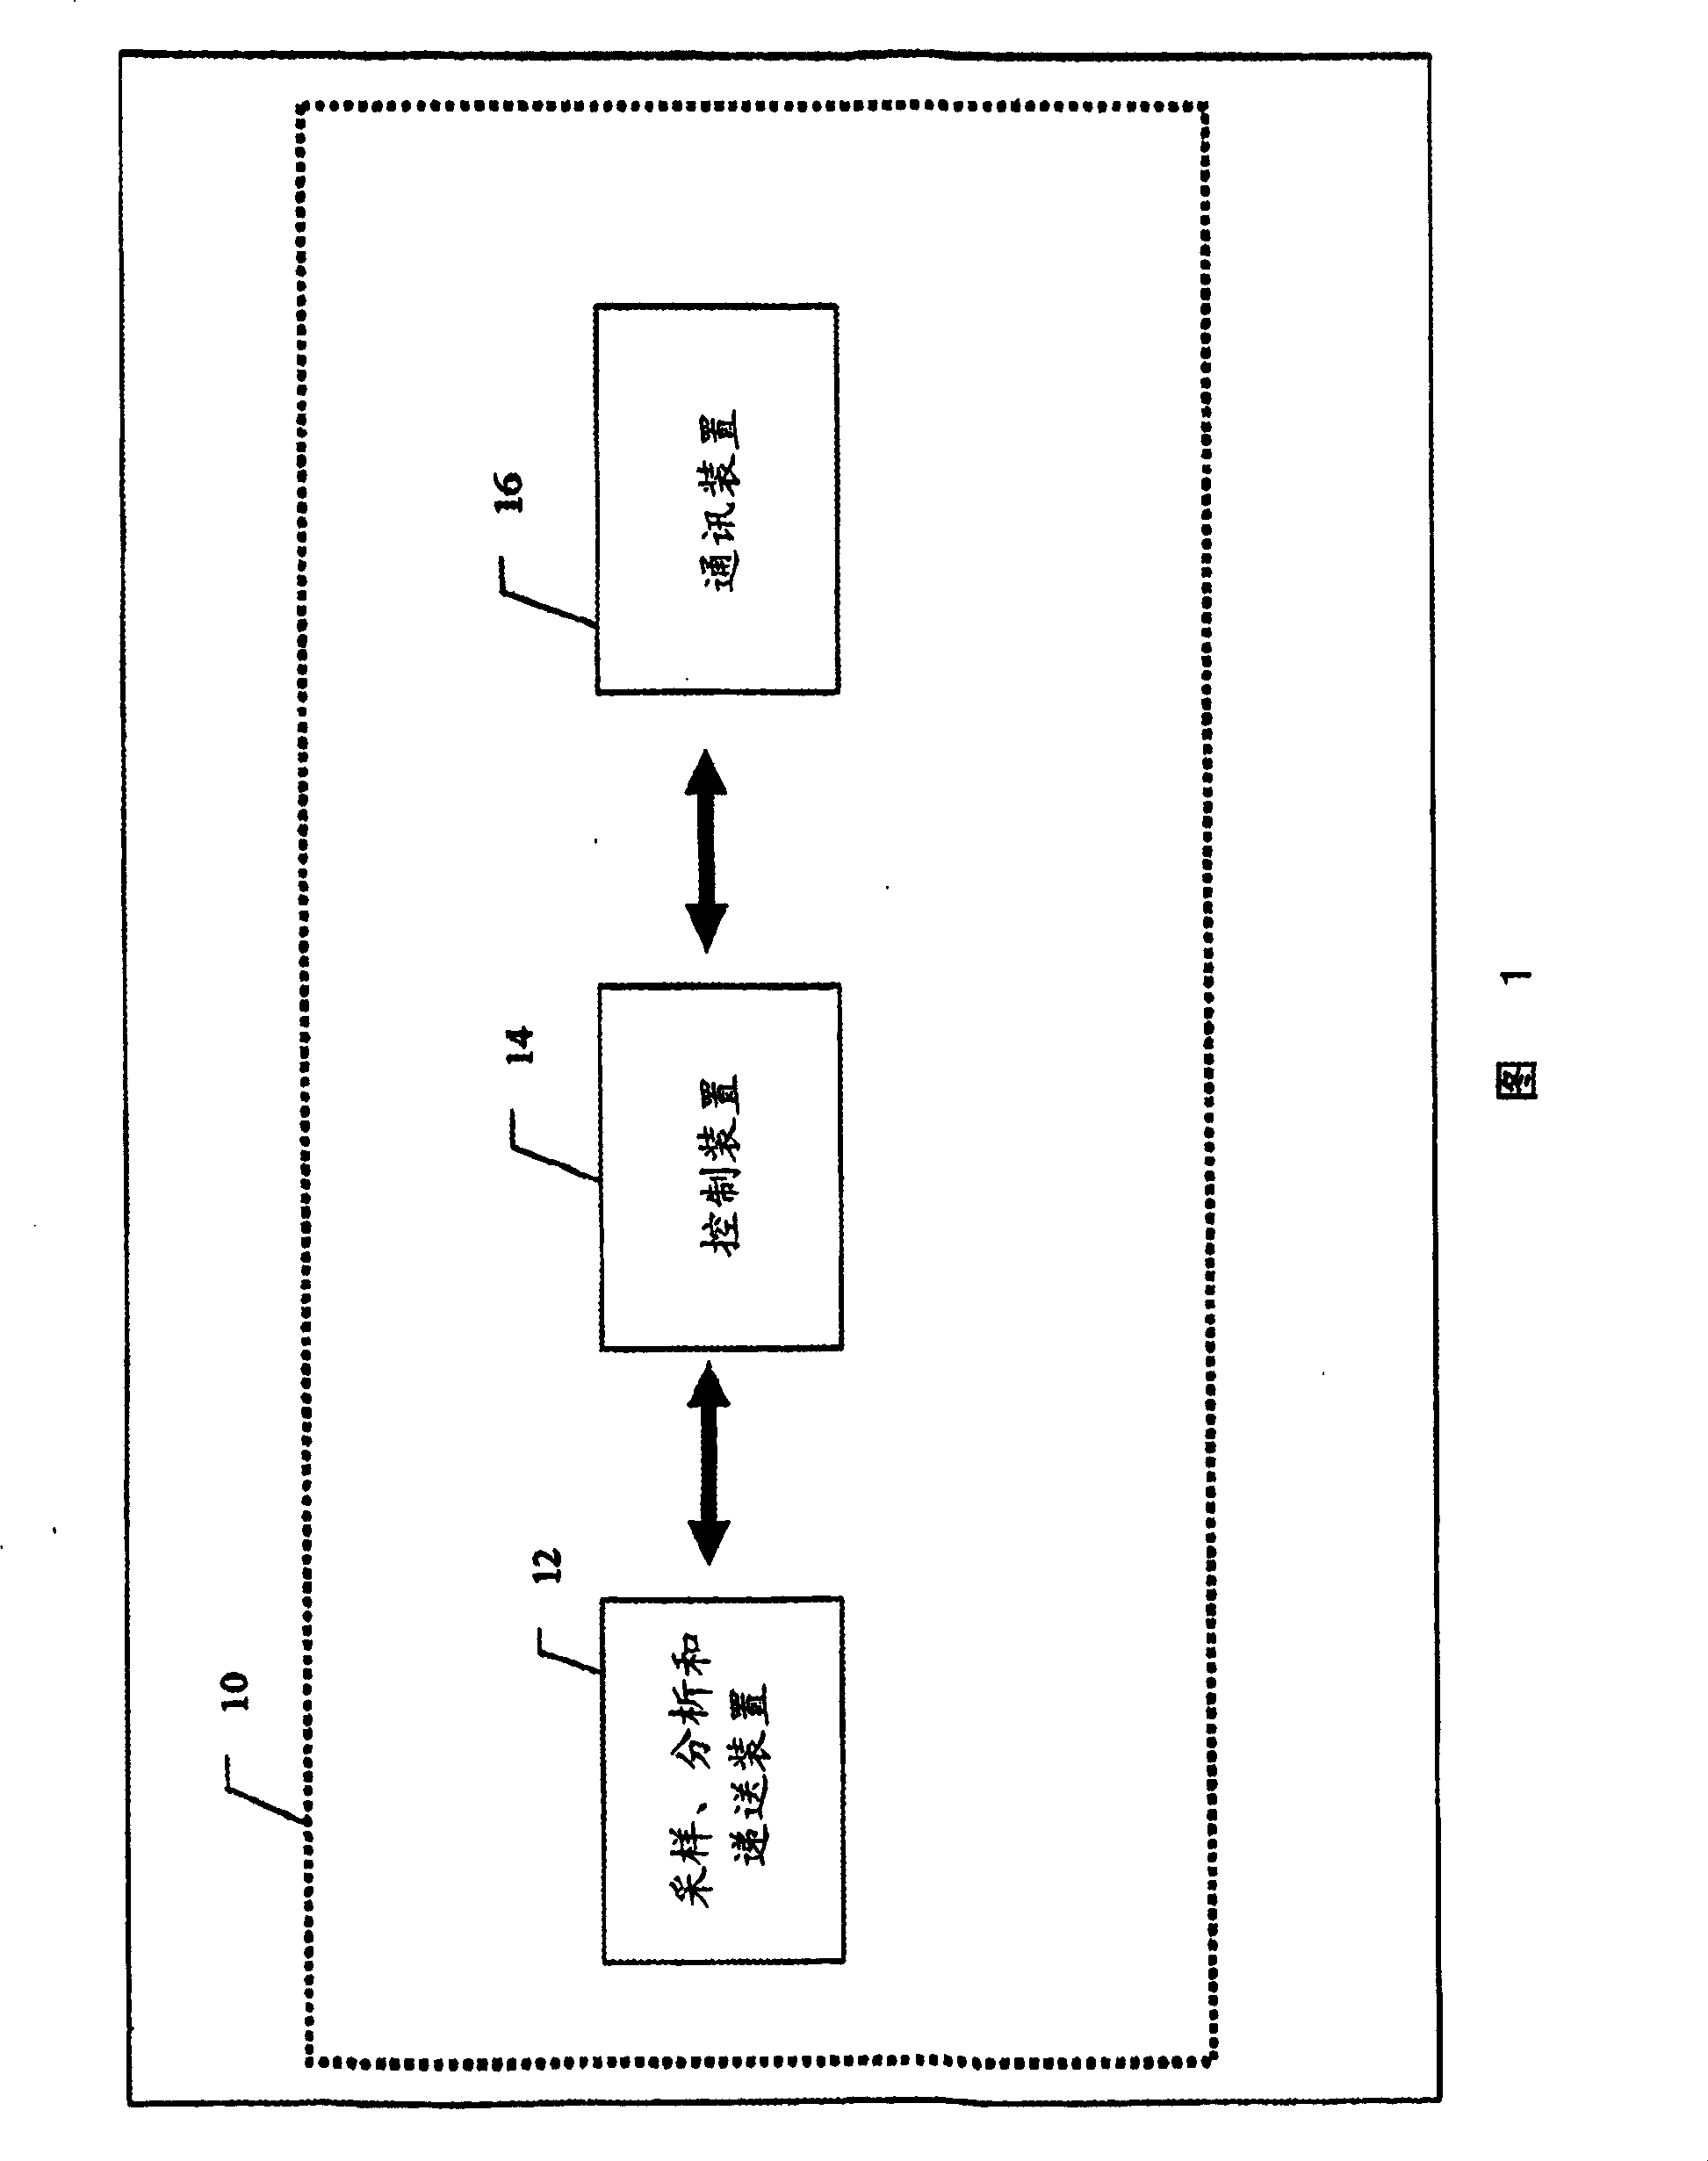 Configurable, flexible apparatus and method for personal health monitoring and delivery